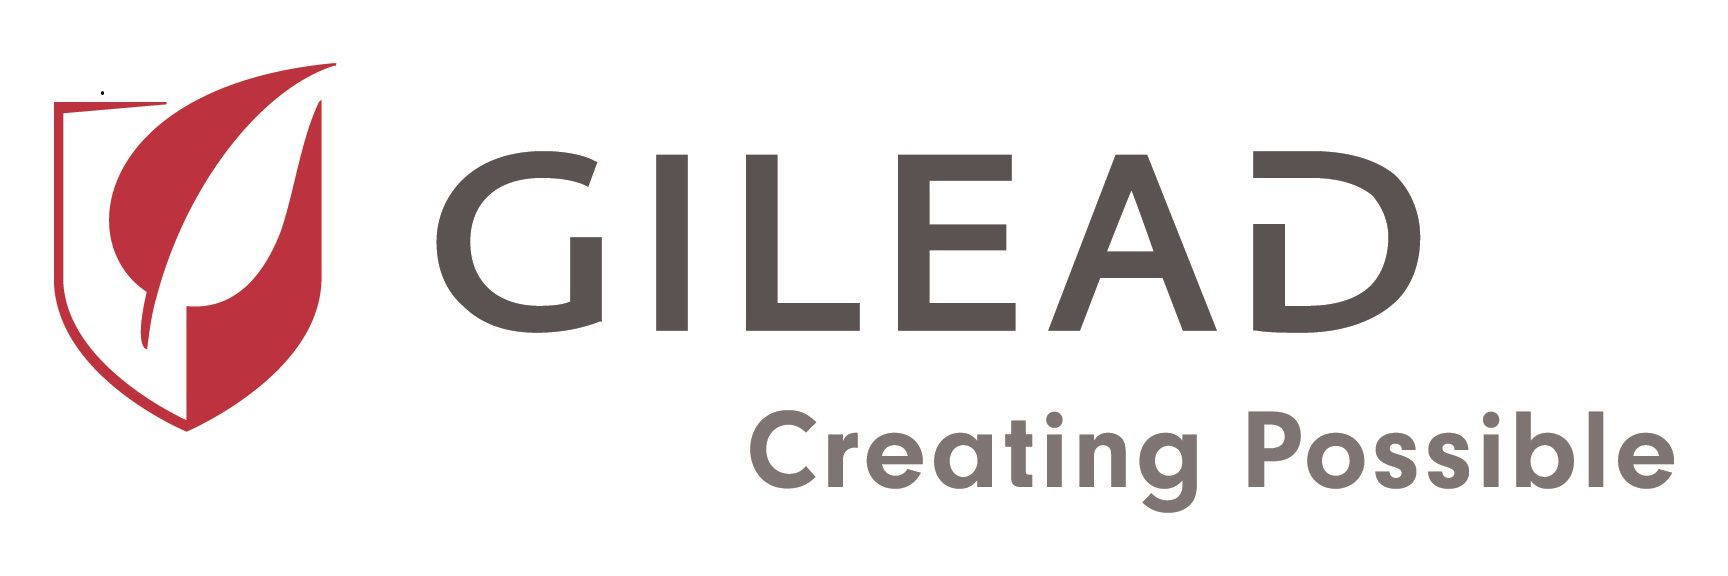 Gilead logo features a red and white shield with a stylized leaf on the left and the text "GILEAD" in gray, next to "Creating Possible" underneath.